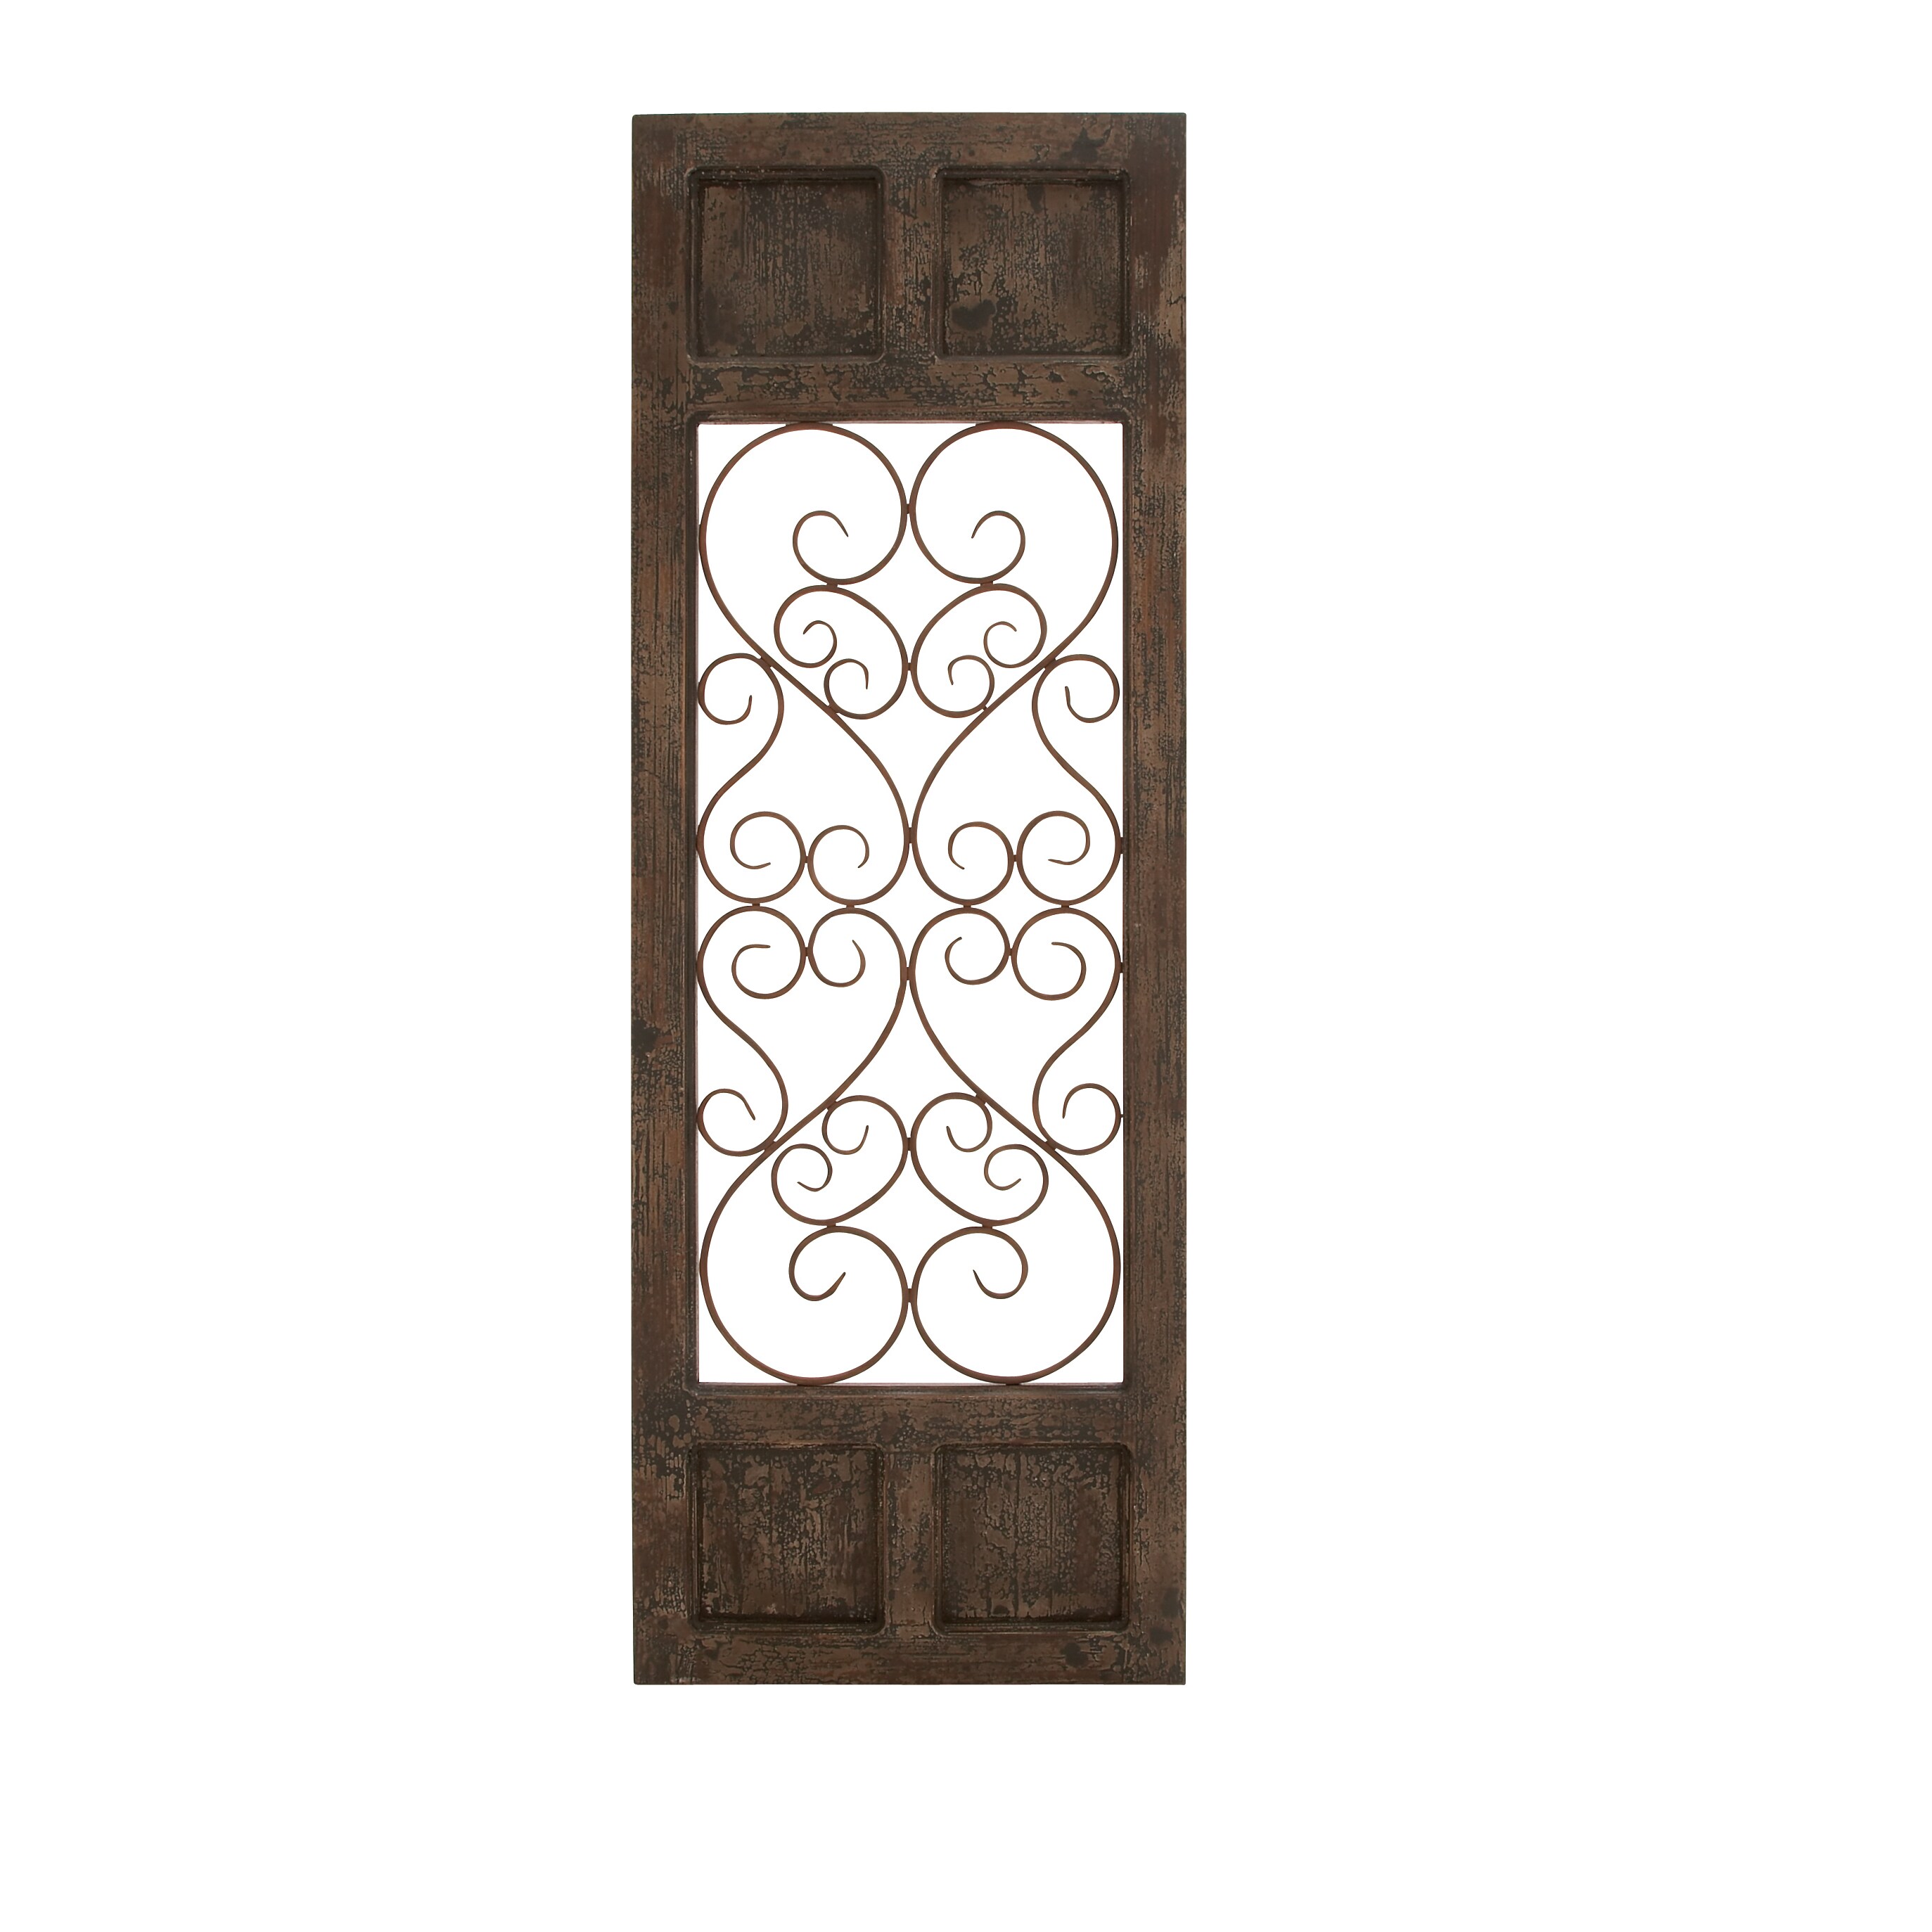 Classic Style Dark Brown Wood Metal Wall Panel (Dark brownDimensions 57 inches high x 20 inches wide x 1 inch deep  )